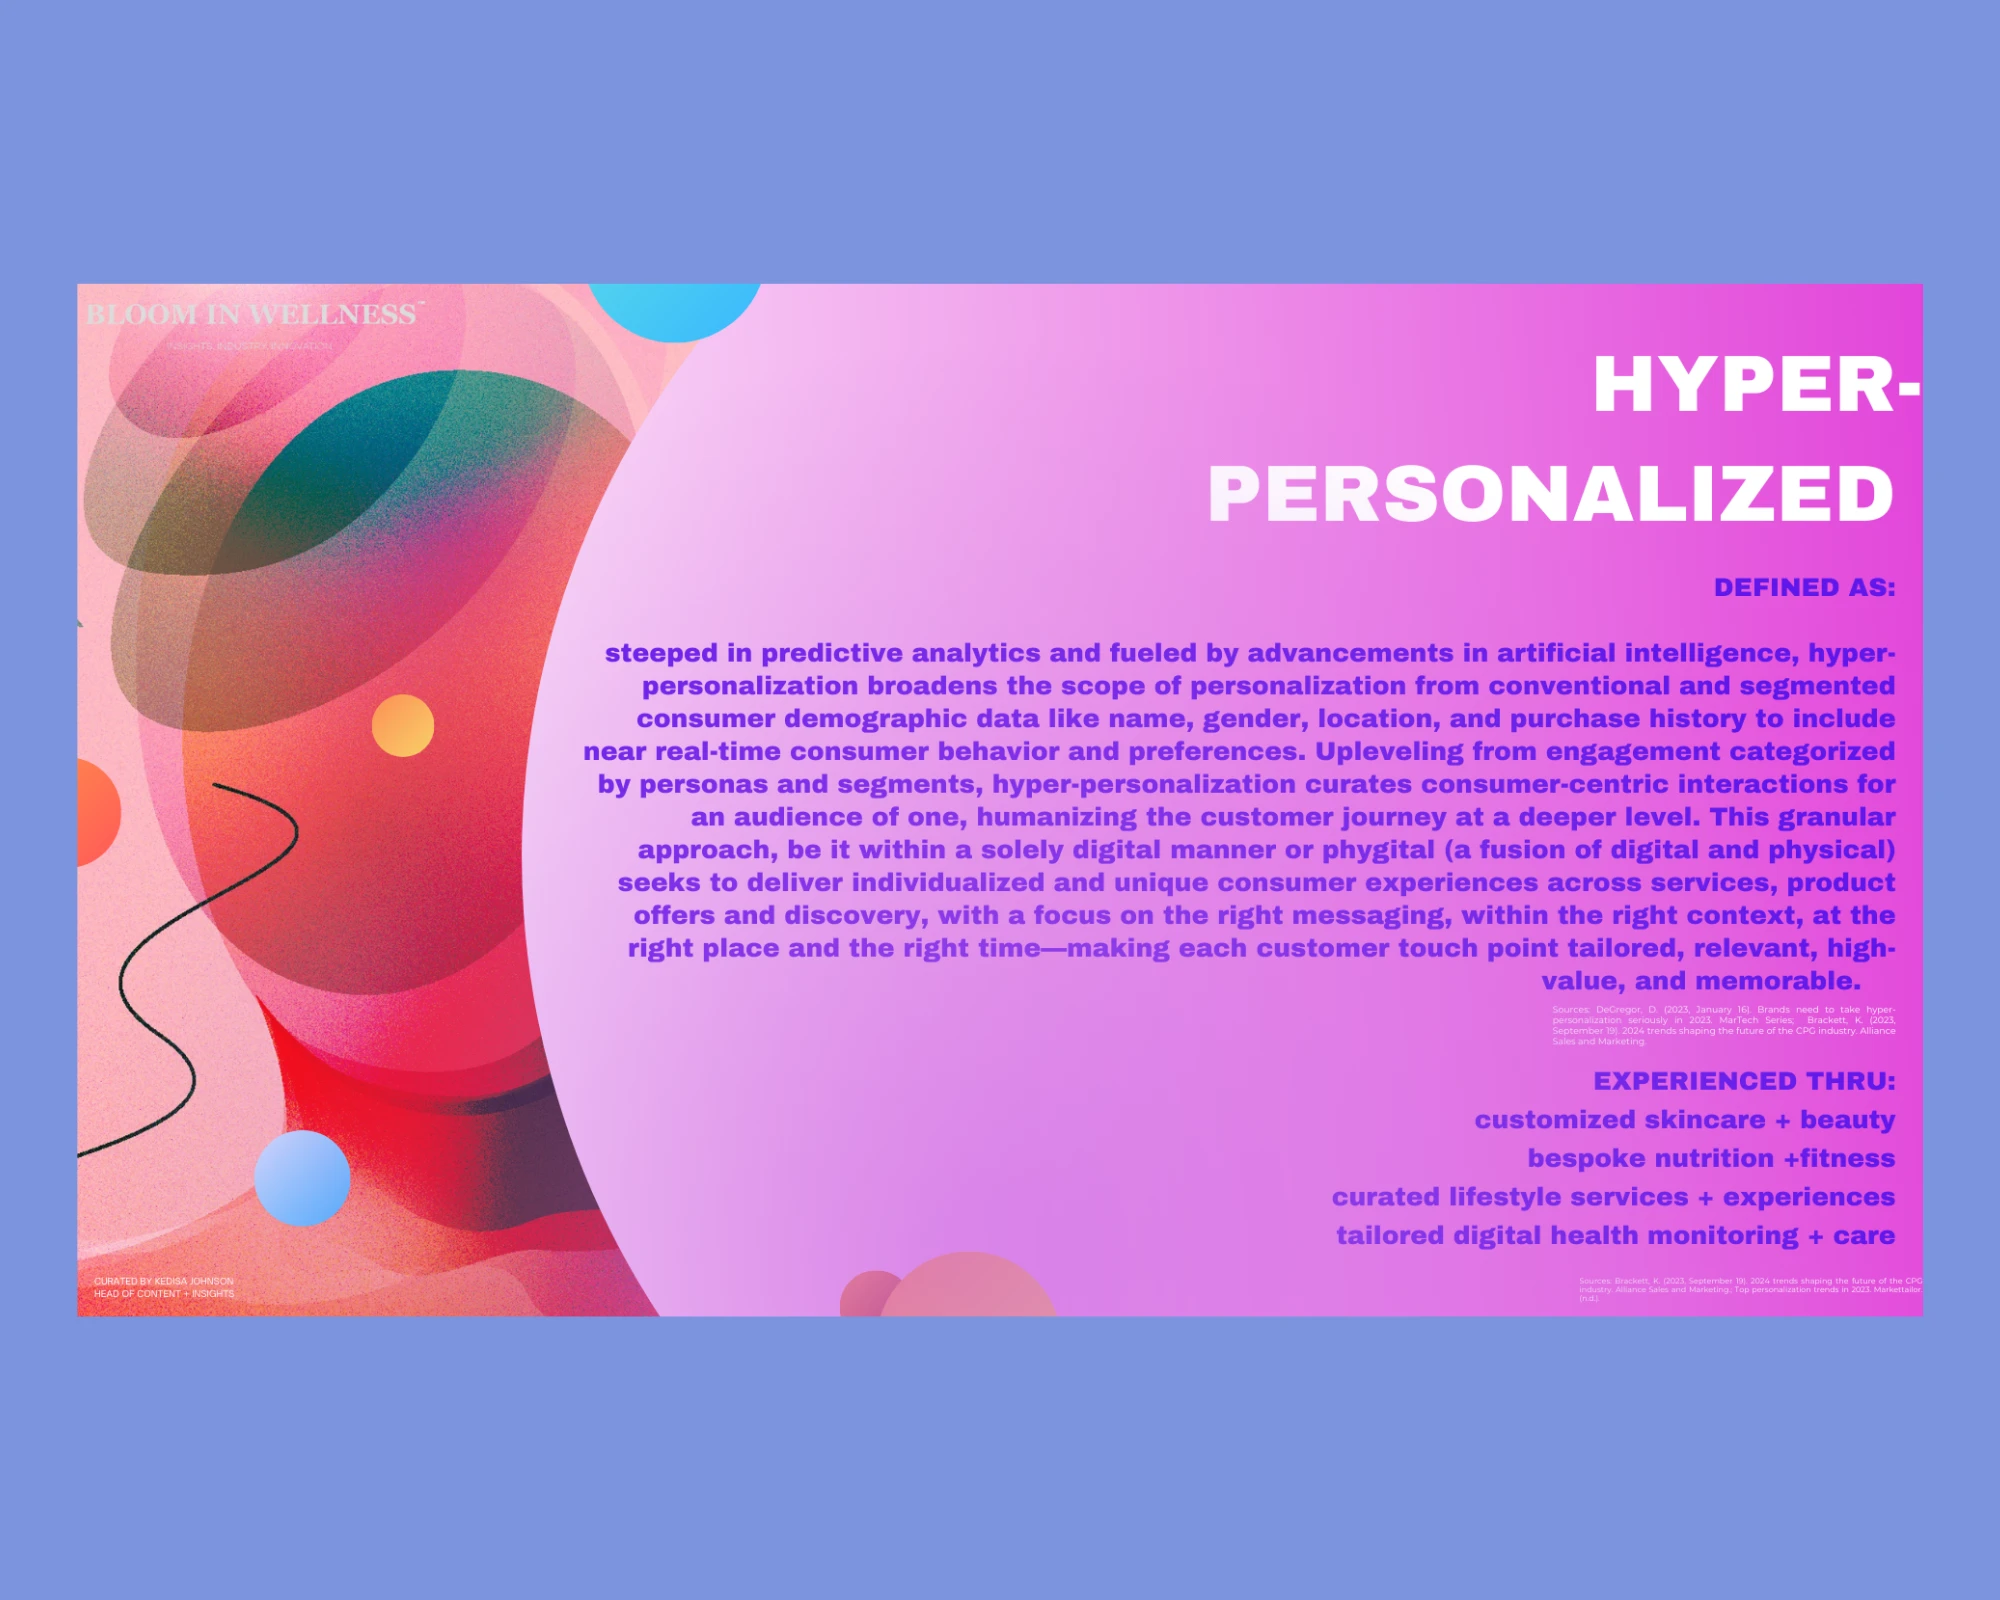 TREND: HYPER-PERSONALIZED